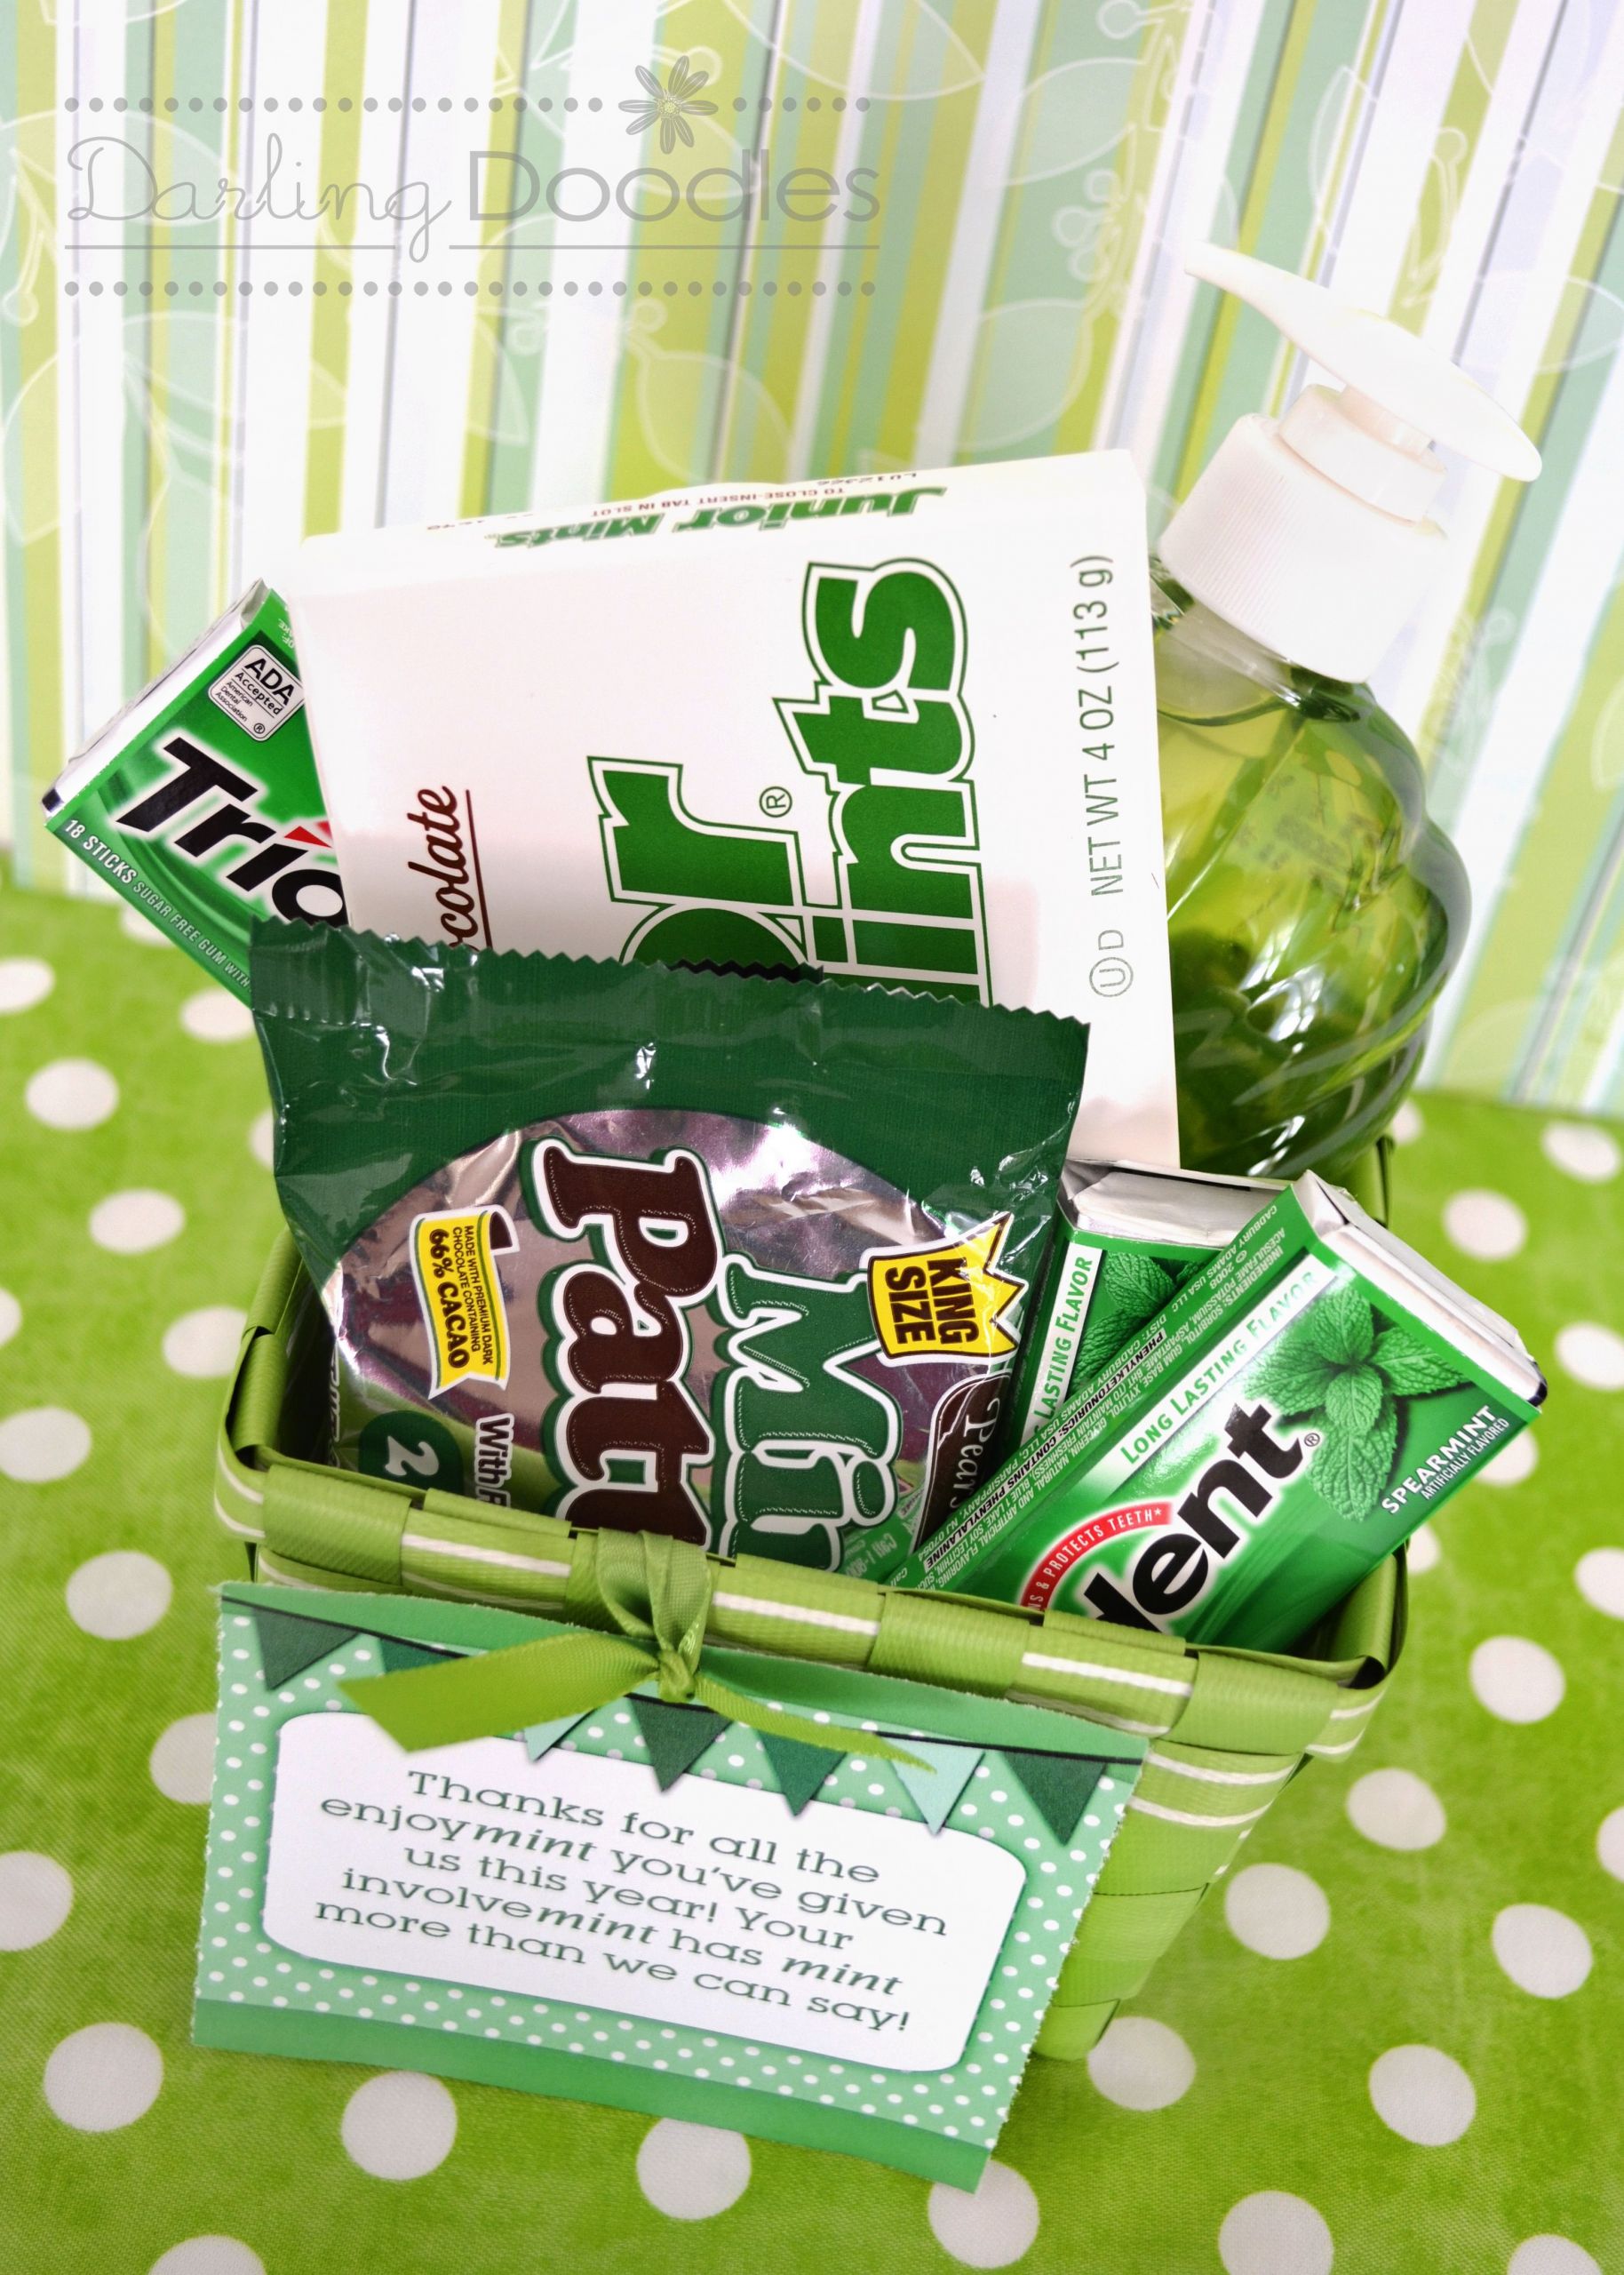 Thank You Gift Ideas For Male Friends
 Mint Gift Basket Idea from Darling Doodles